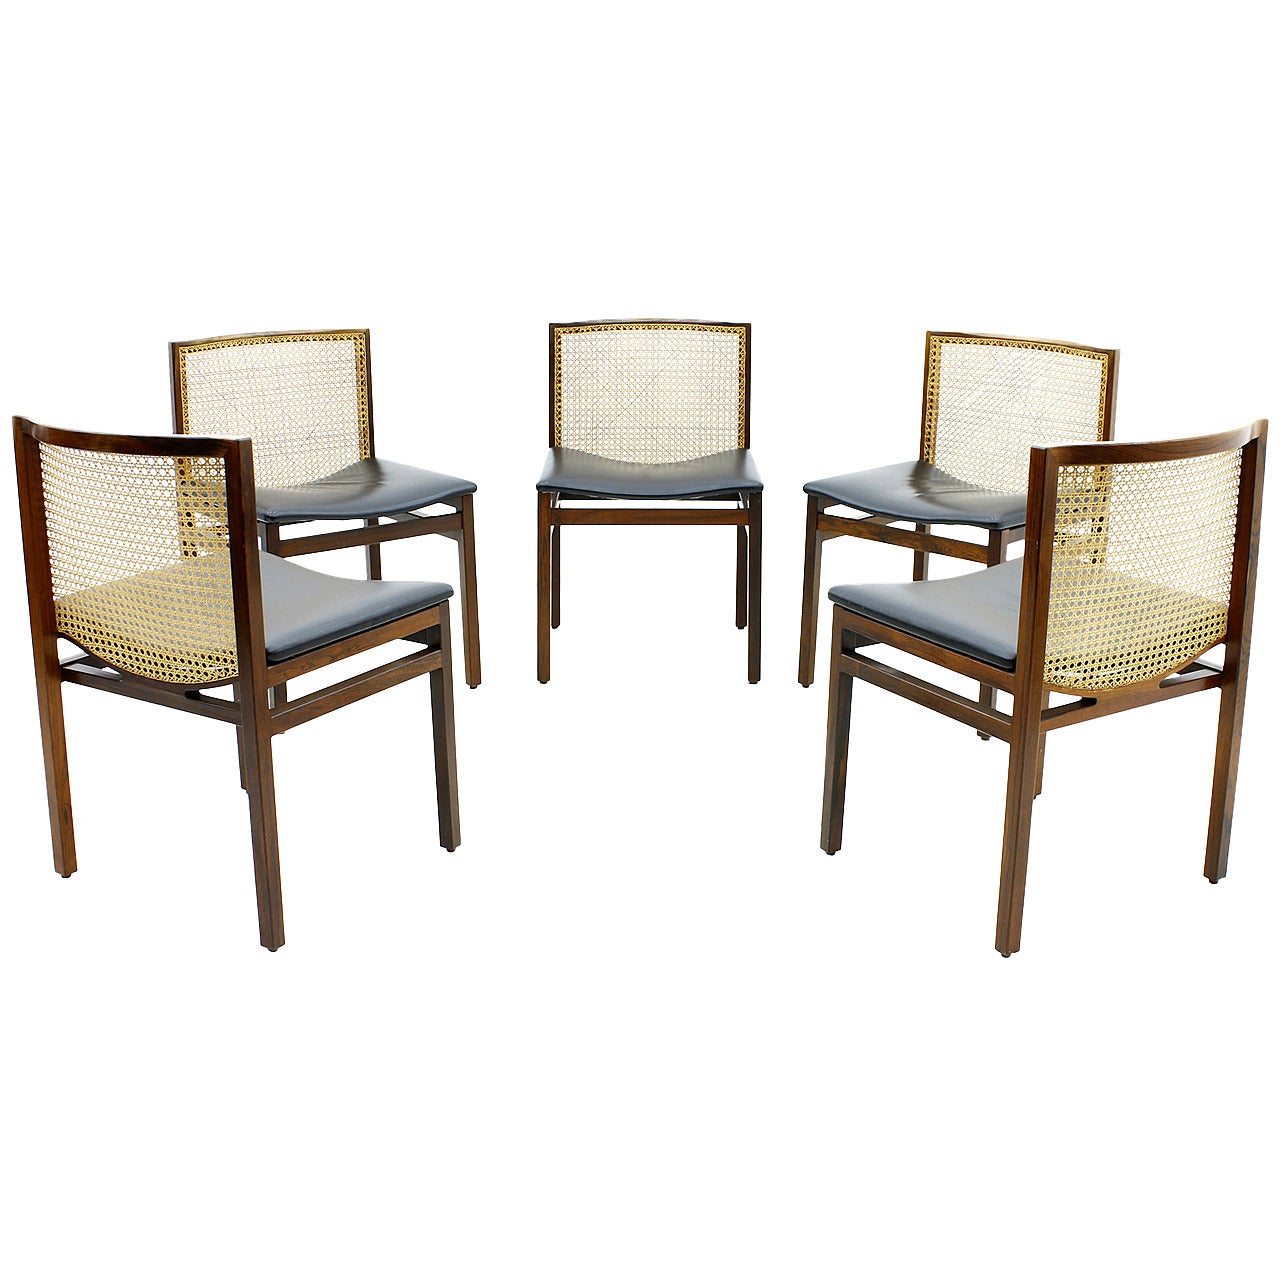 Set of Five Scandinavian Dining Chairs, Cane and Leather, 1960s For Sale